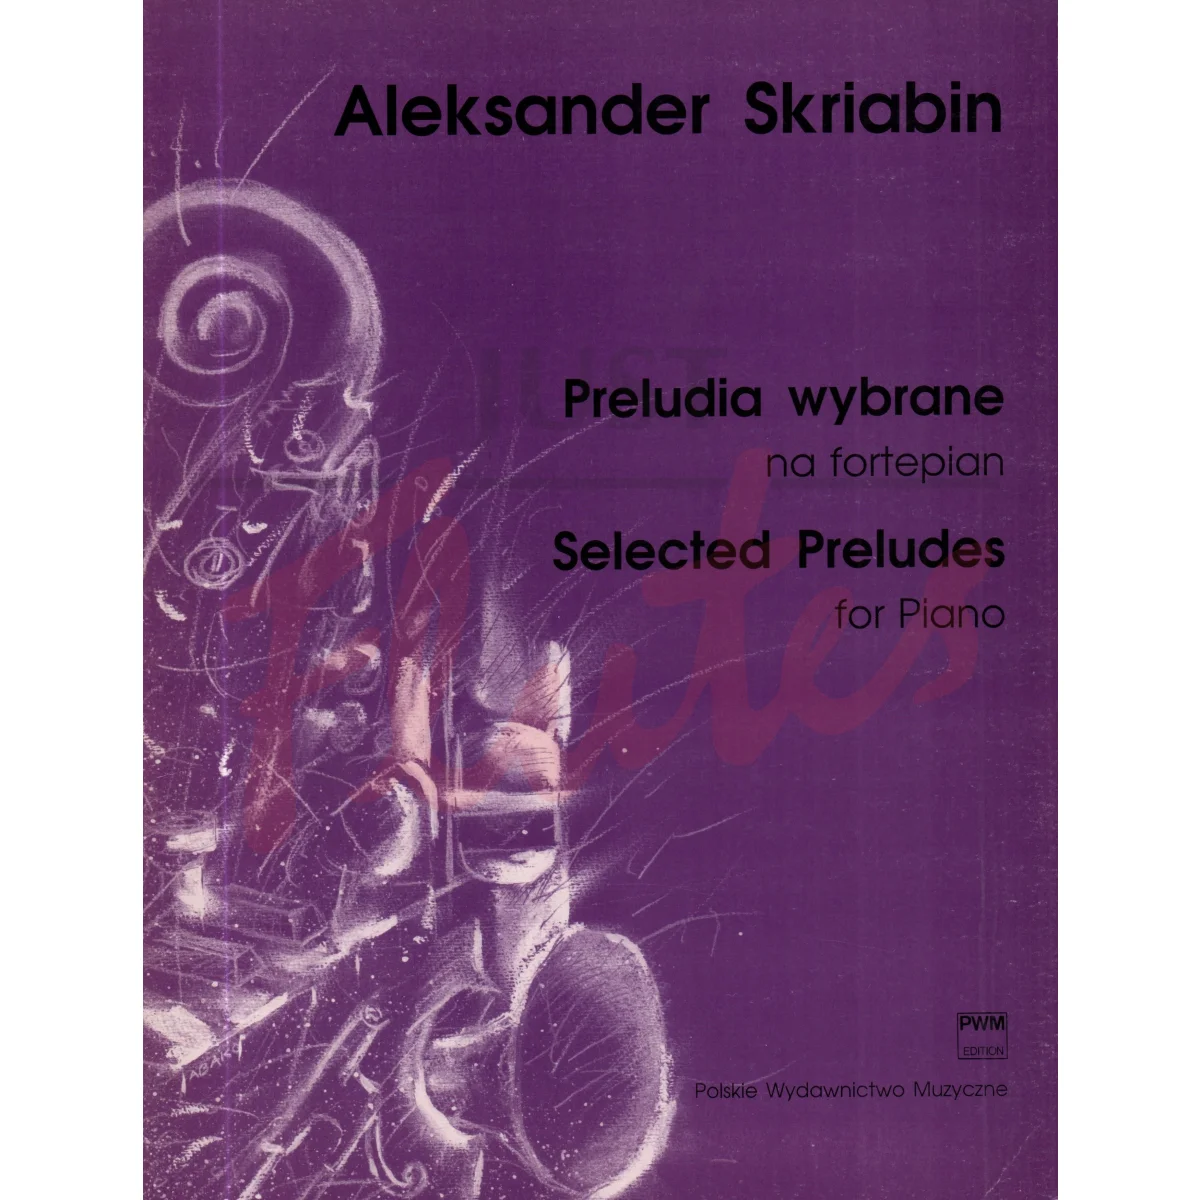 Selected Preludes for Piano